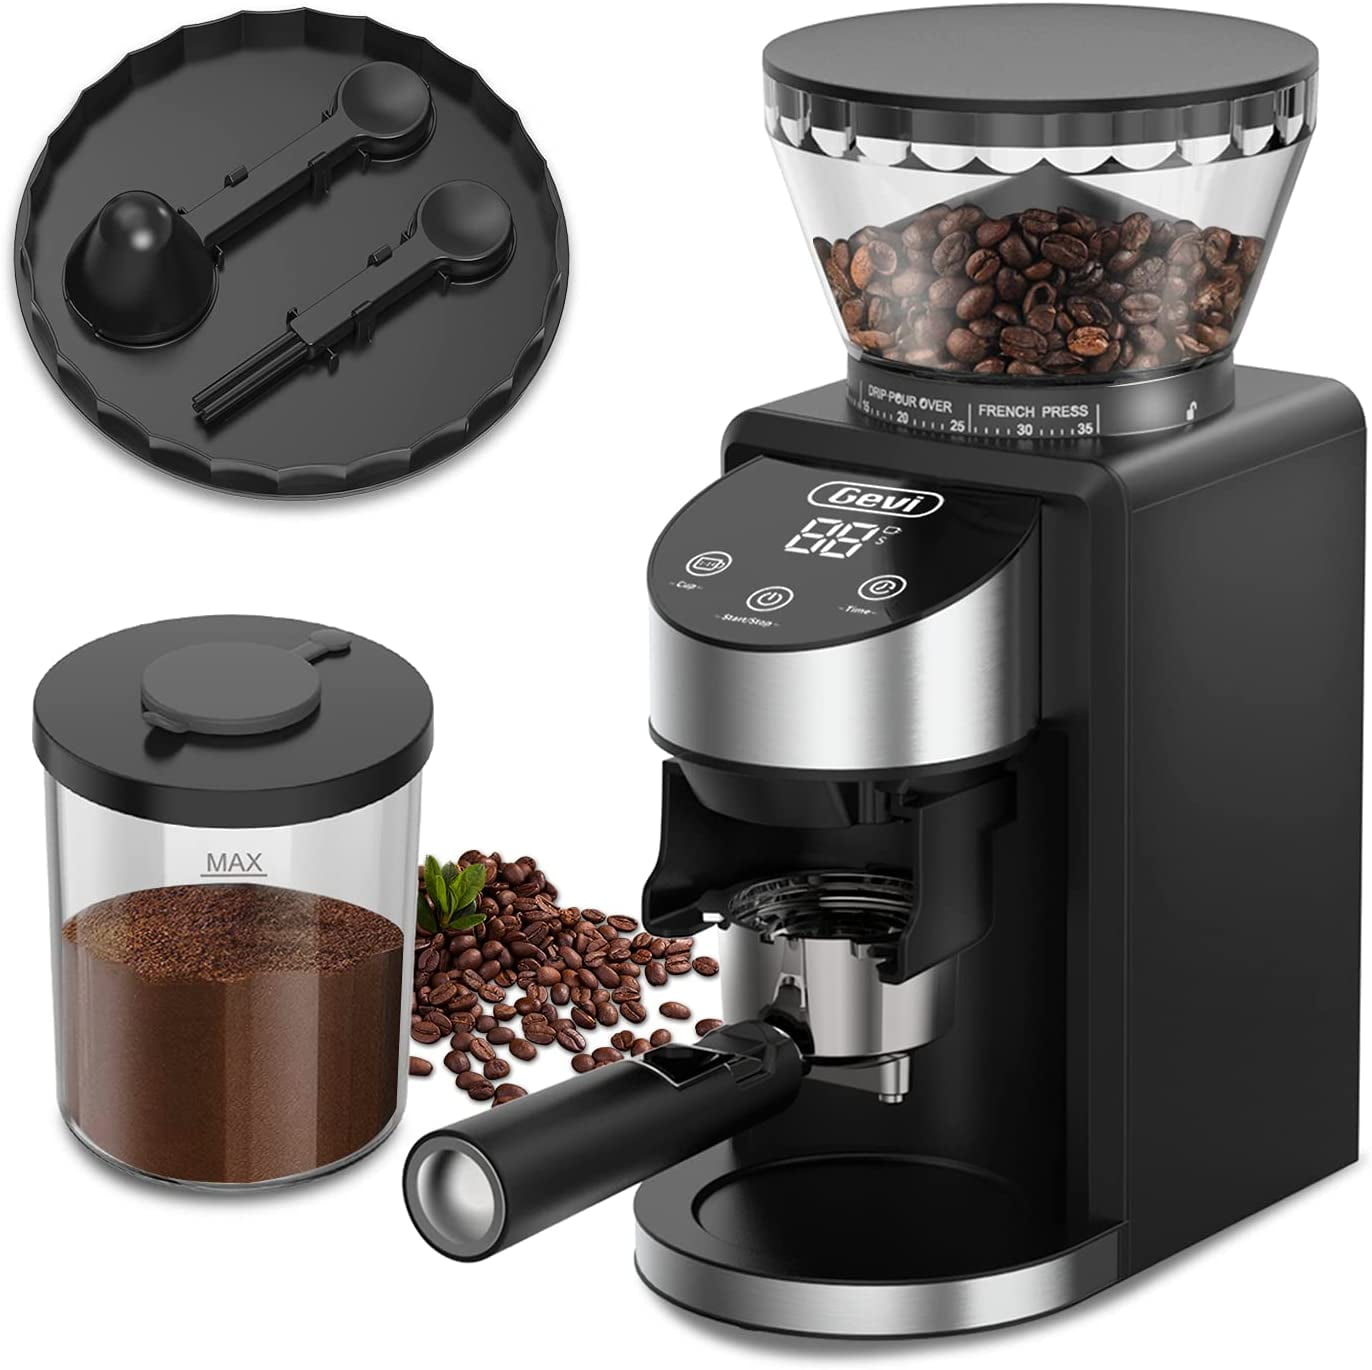 Adjustable Burr Mill with 35 Precise Grind Settings Gevi Burr Coffee Grinder Electric Coffee Grinder for Espresso/Drip/Percolator/French Press/ American/ Turkish Coffee Makers 120V/200W Black